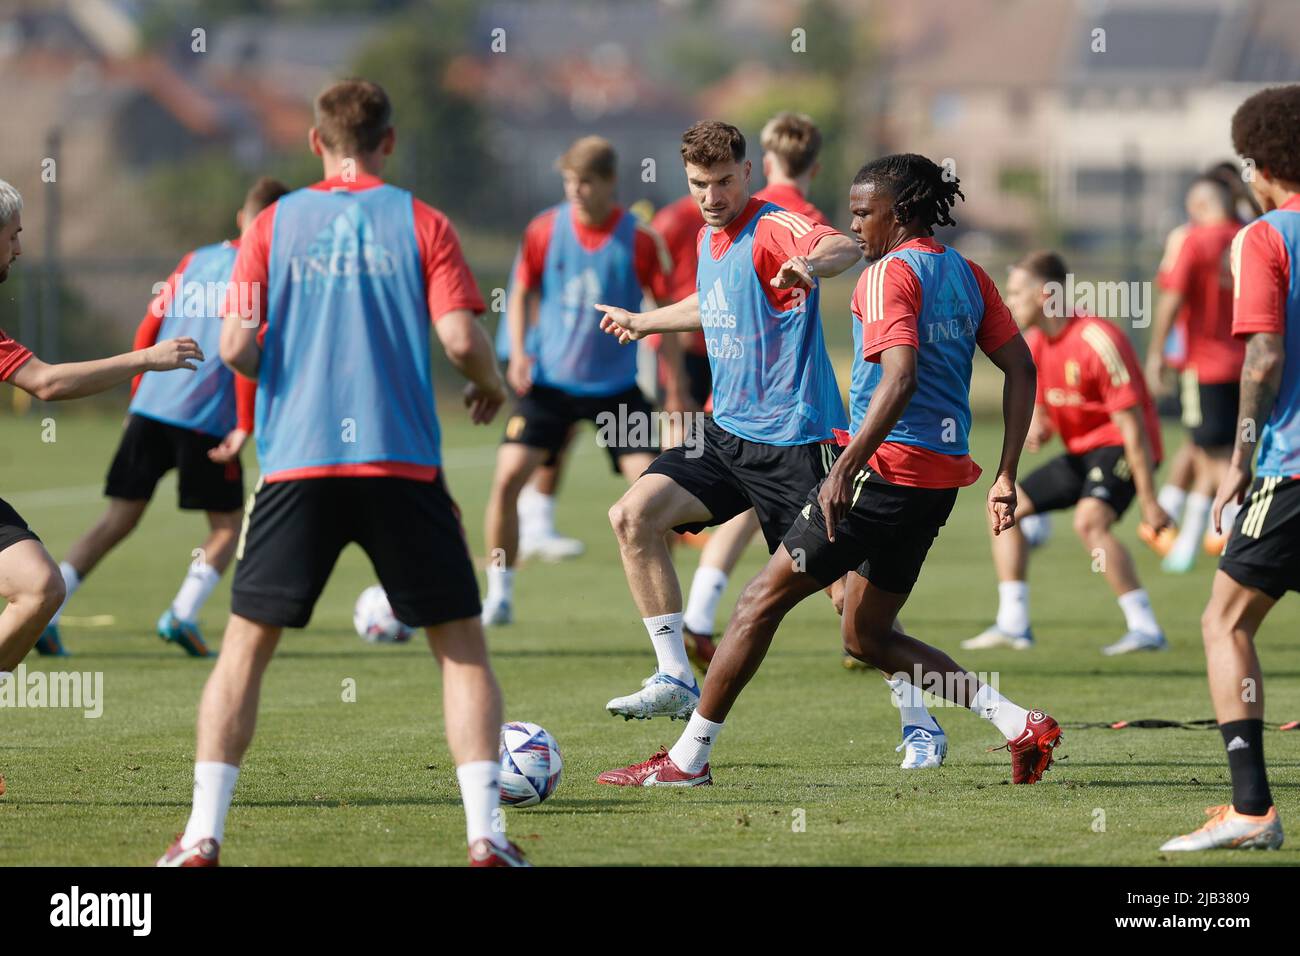 Belgium's Thomas Meunier and Belgium's Dedryck Boyata fight for the ball during a training session of the Belgian national team, the Red Devils, Thursday 02 June 2022 in Tubize, during the preparations for the upcoming UEFA Nations League match against The Netherlands. BELGA PHOTO BRUNO FAHY Stock Photo